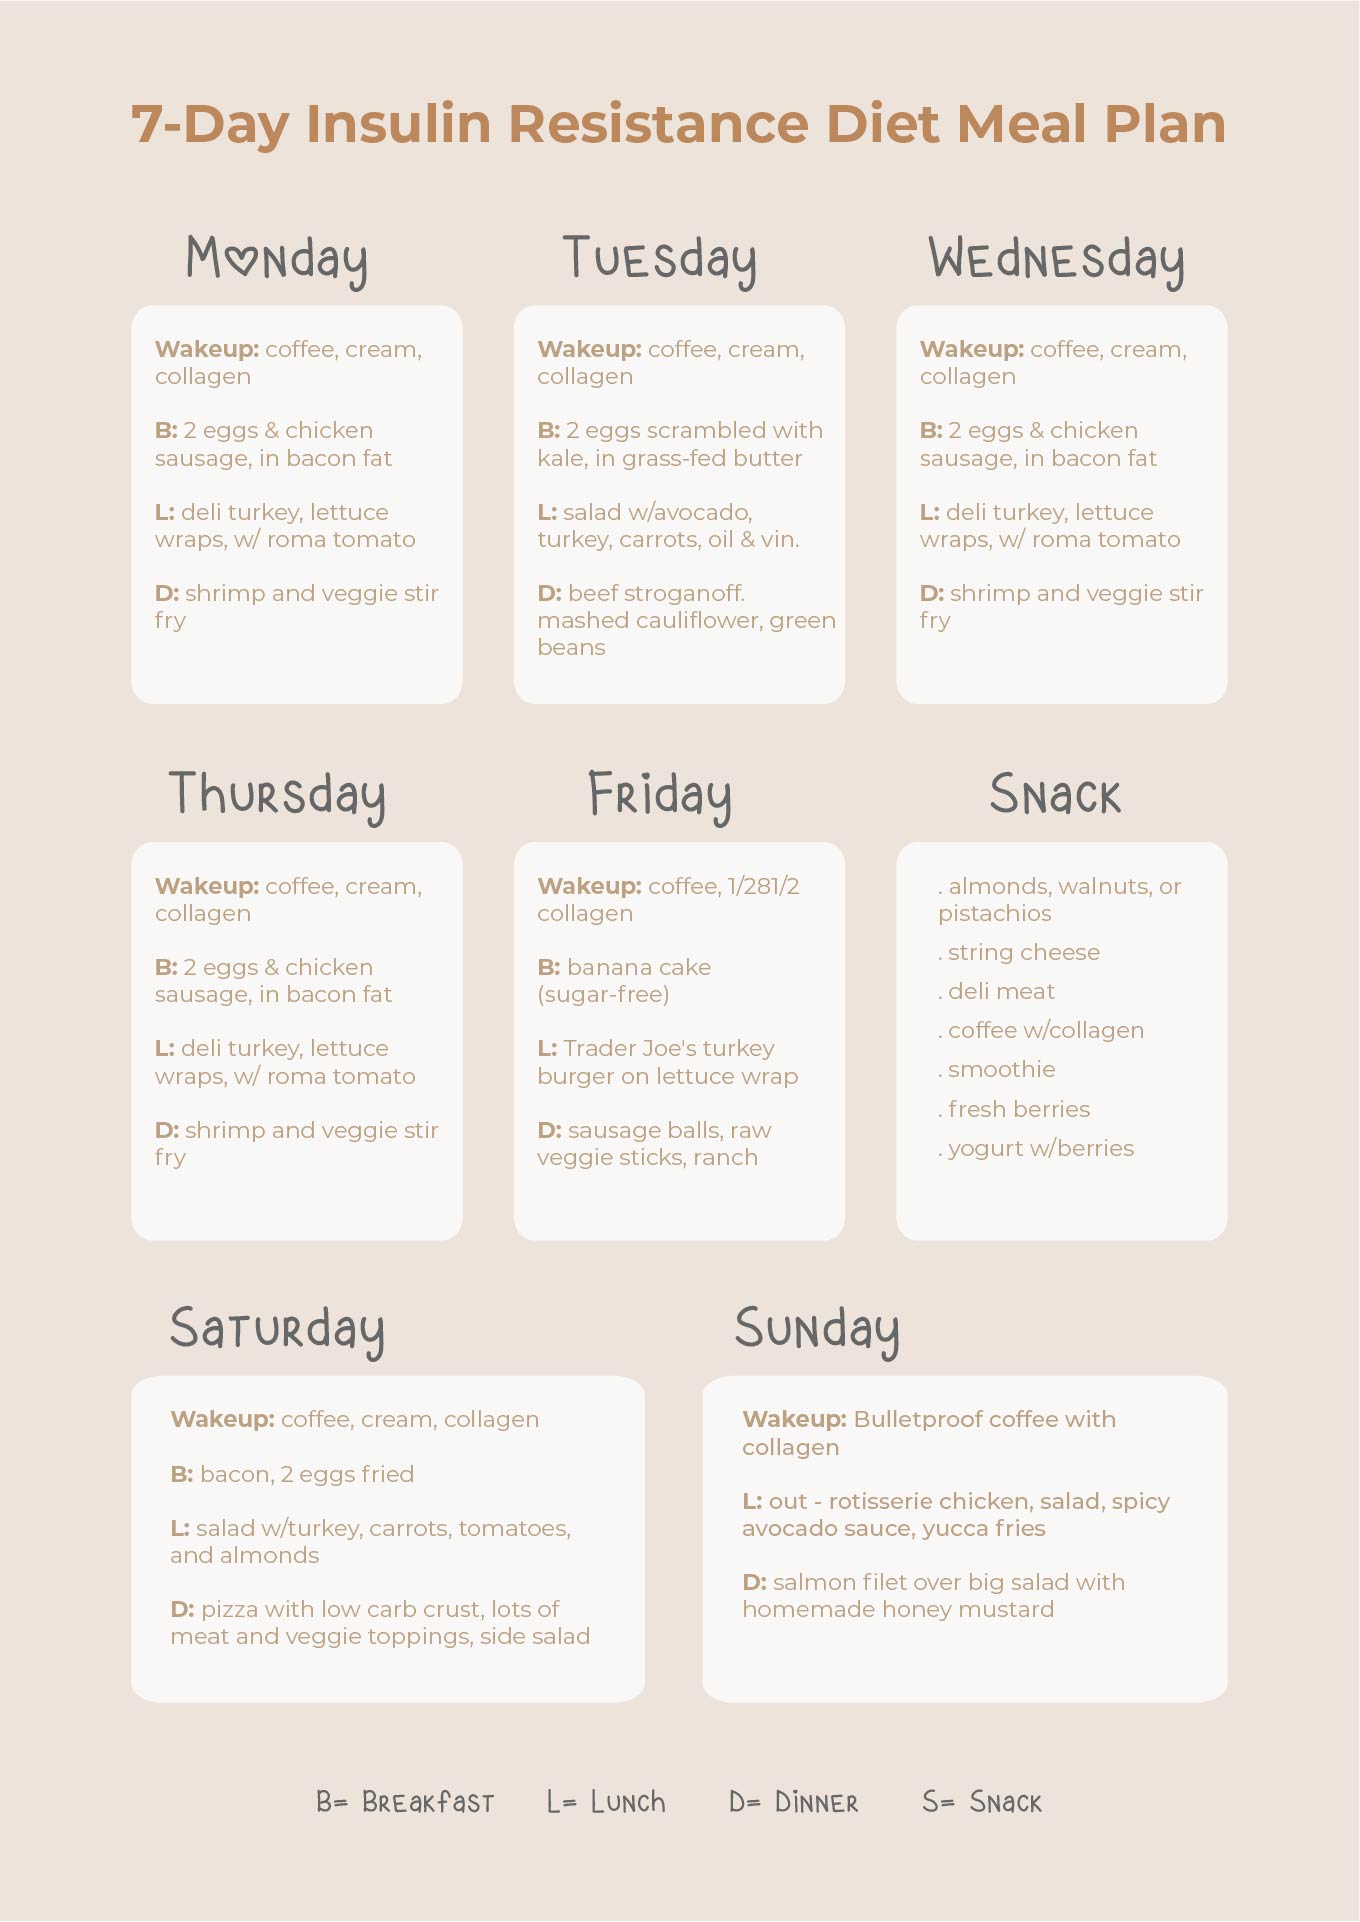 7-Day Insulin Resistance Diet Meal Plan Printable